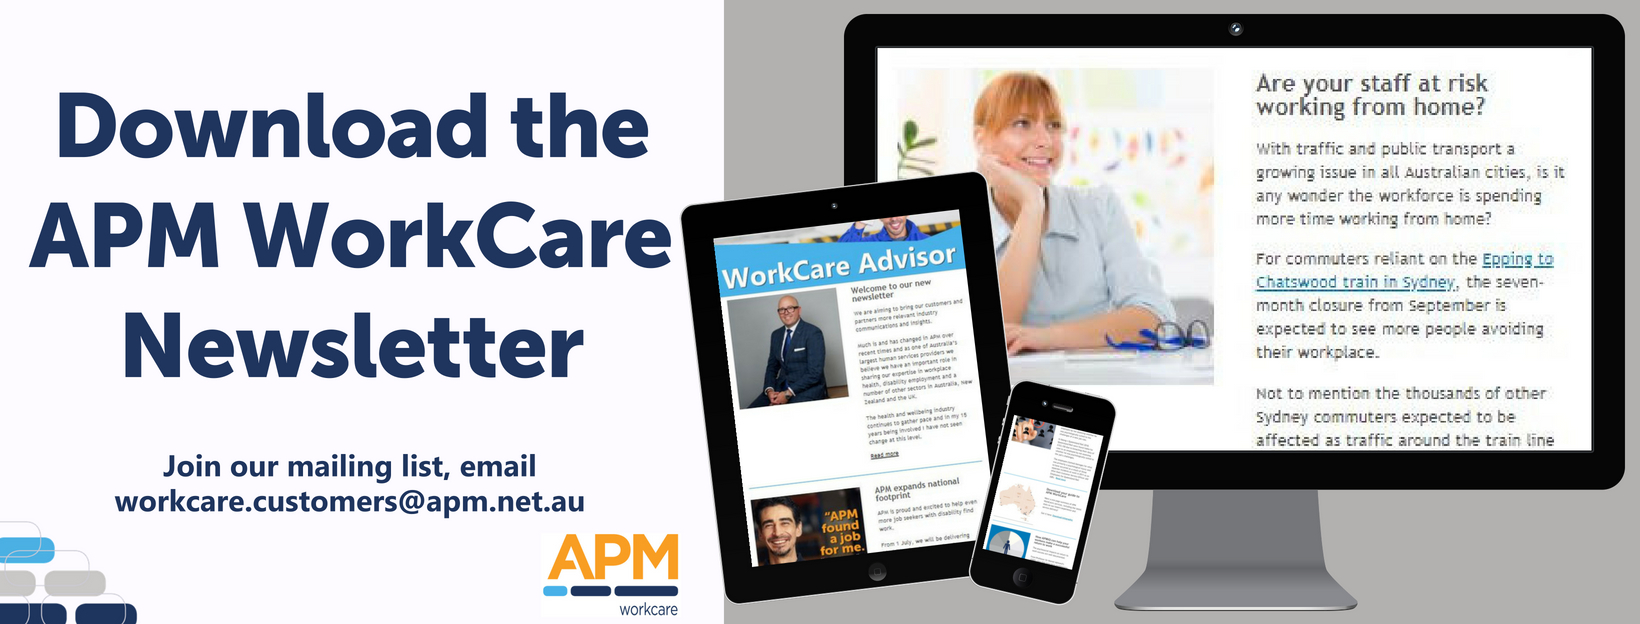 Download the APM WorkCare newsletter, email workcare.customers@apm.net.au to join our mailing list